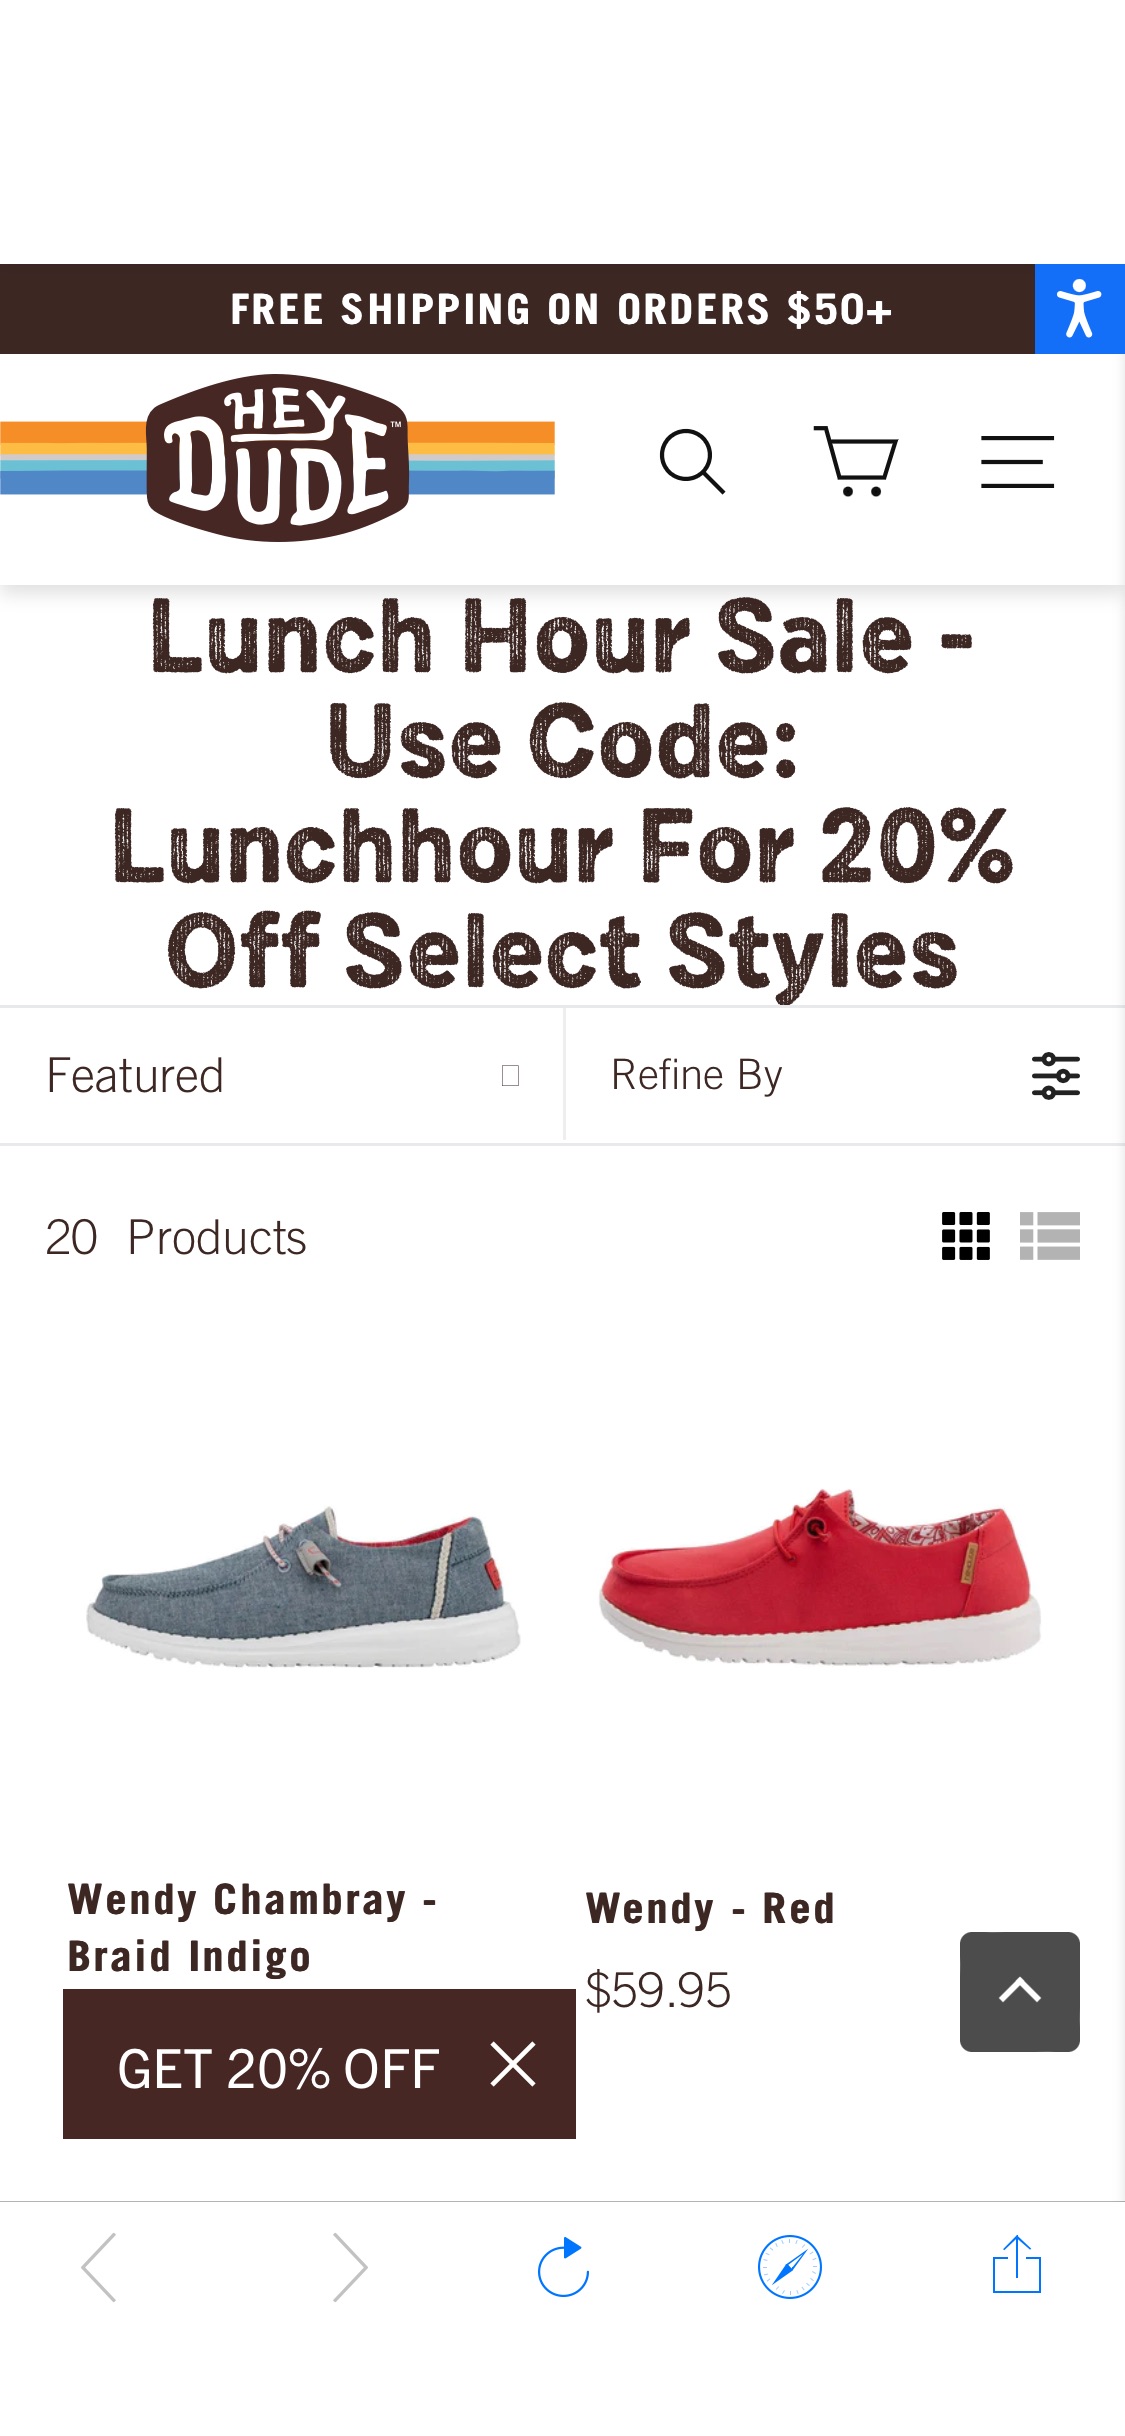 LUNCH HOUR Sale - USE CODE: LUNCHHOUR for 20% off select styles – HEYDUDE shoes
午饭时间闪促！指定鞋款8折，仅限今天下午东部时间4点以前！